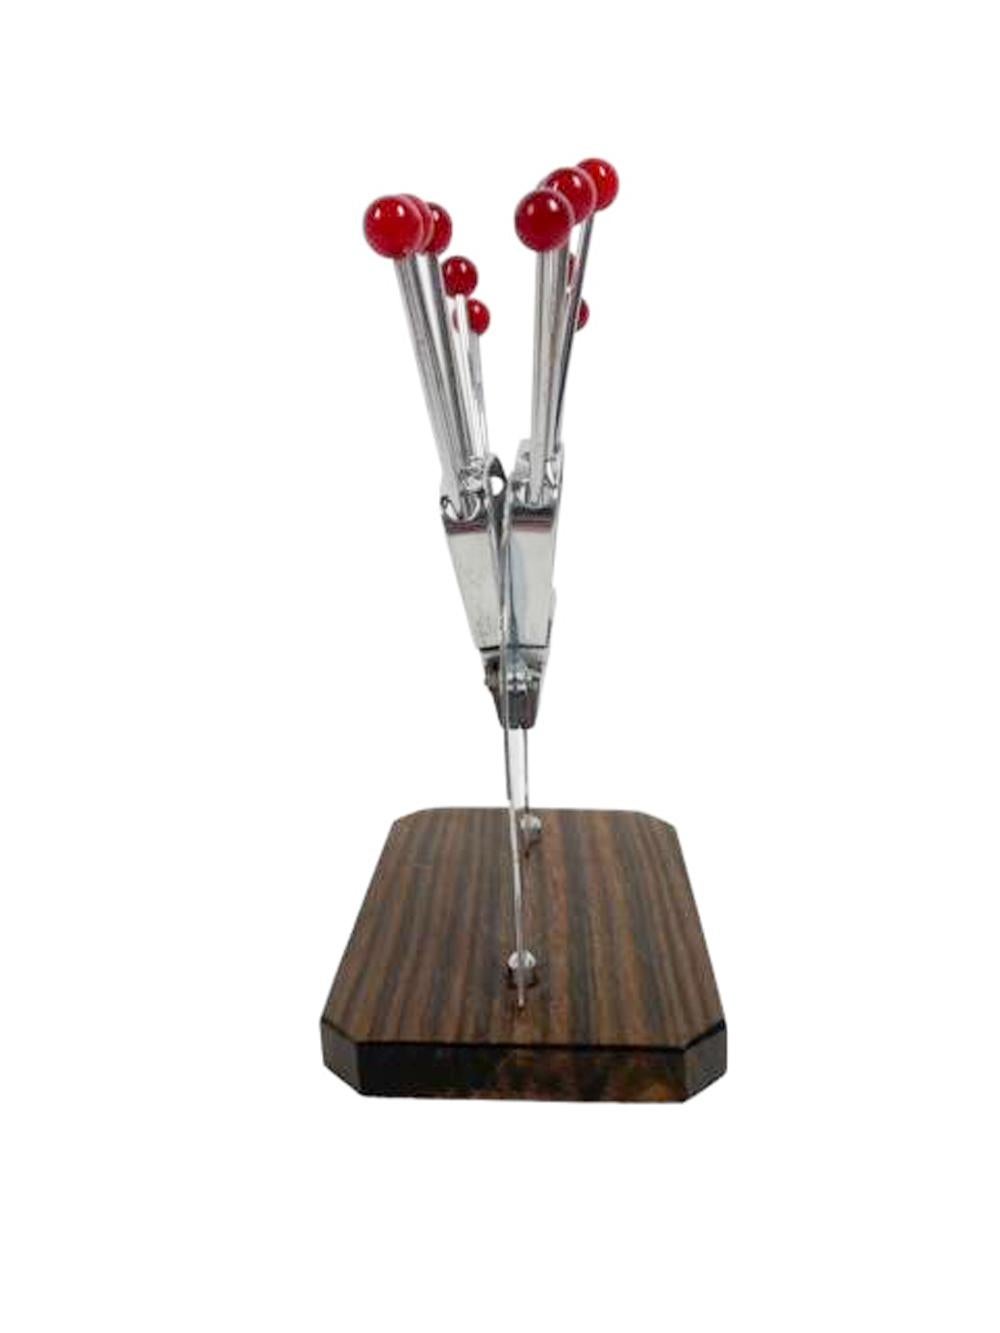 Art Deco Elephant Cocktail Pick Set in Chrome and Wood w/12 Red Ball Top Picks In Good Condition For Sale In Chapel Hill, NC